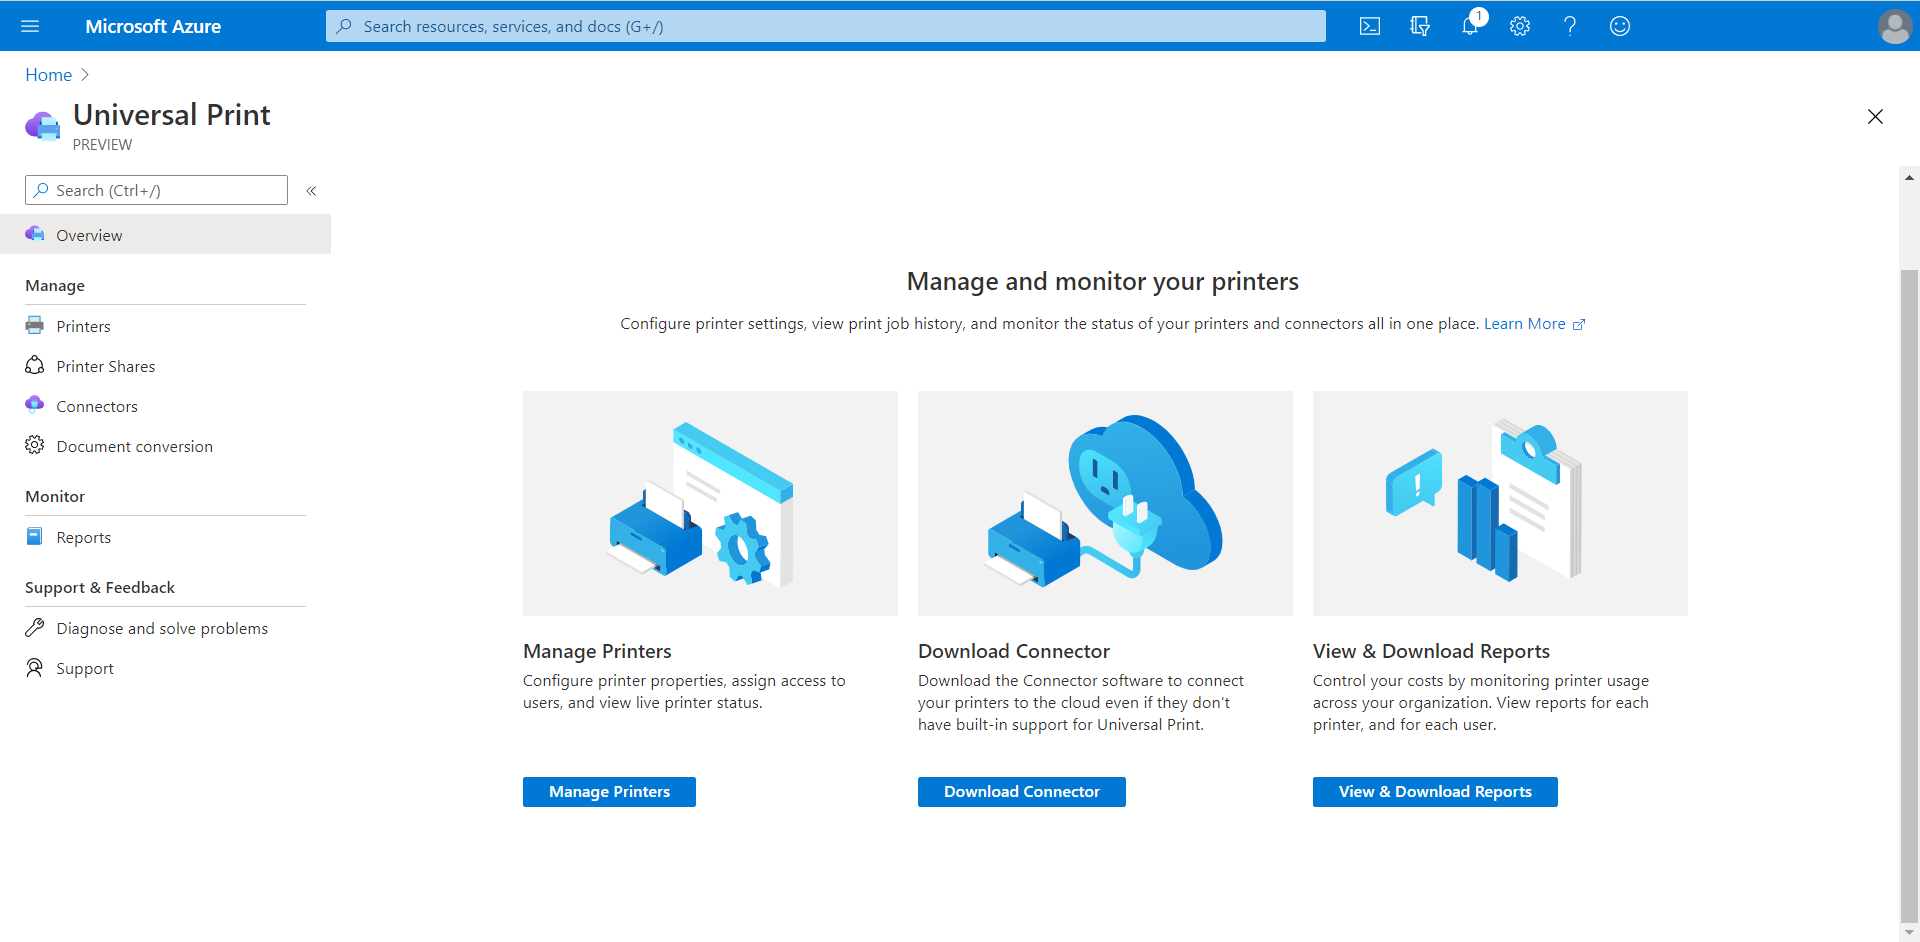 Learn how configure publish Microsoft Universal Print for Windows 365 cloud PCs to simplify the you manage your printers today | christiaanbrinkhoff.com - Sharing Cloud and Virtualization Knowledge